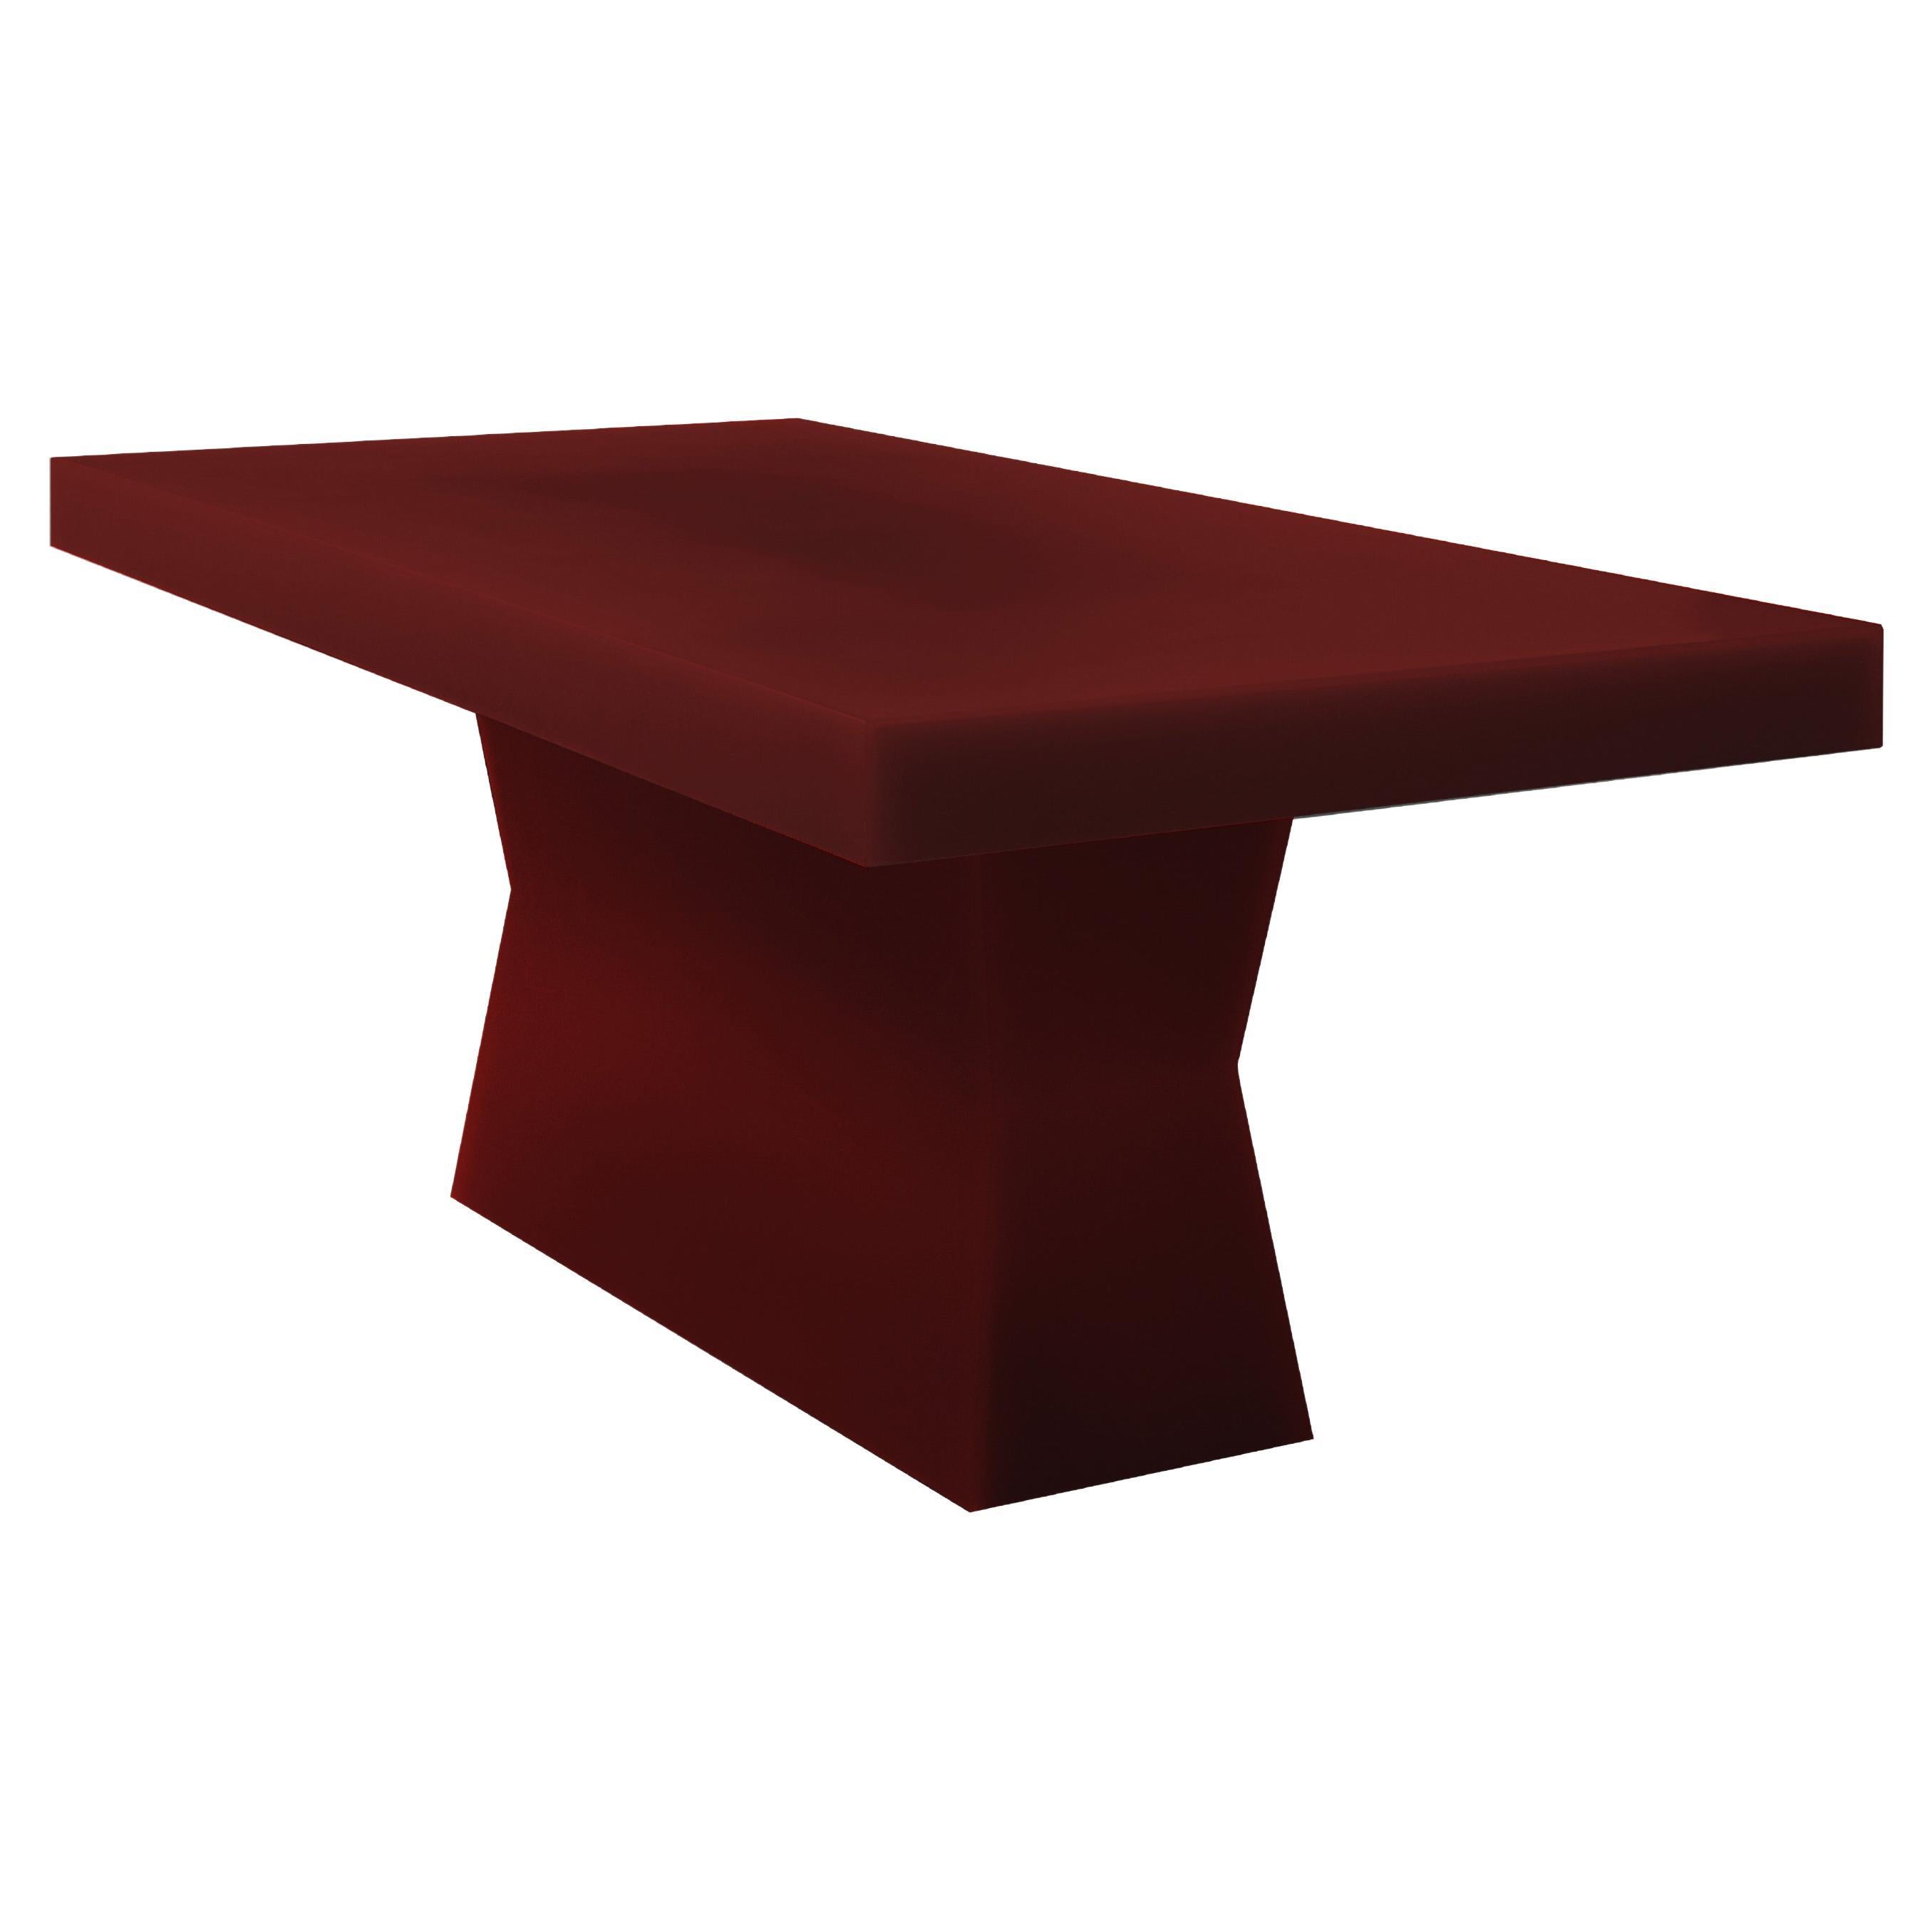 Pool Resin Dining Table In Burgundy by Facture, Represented by Tuleste Factory For Sale